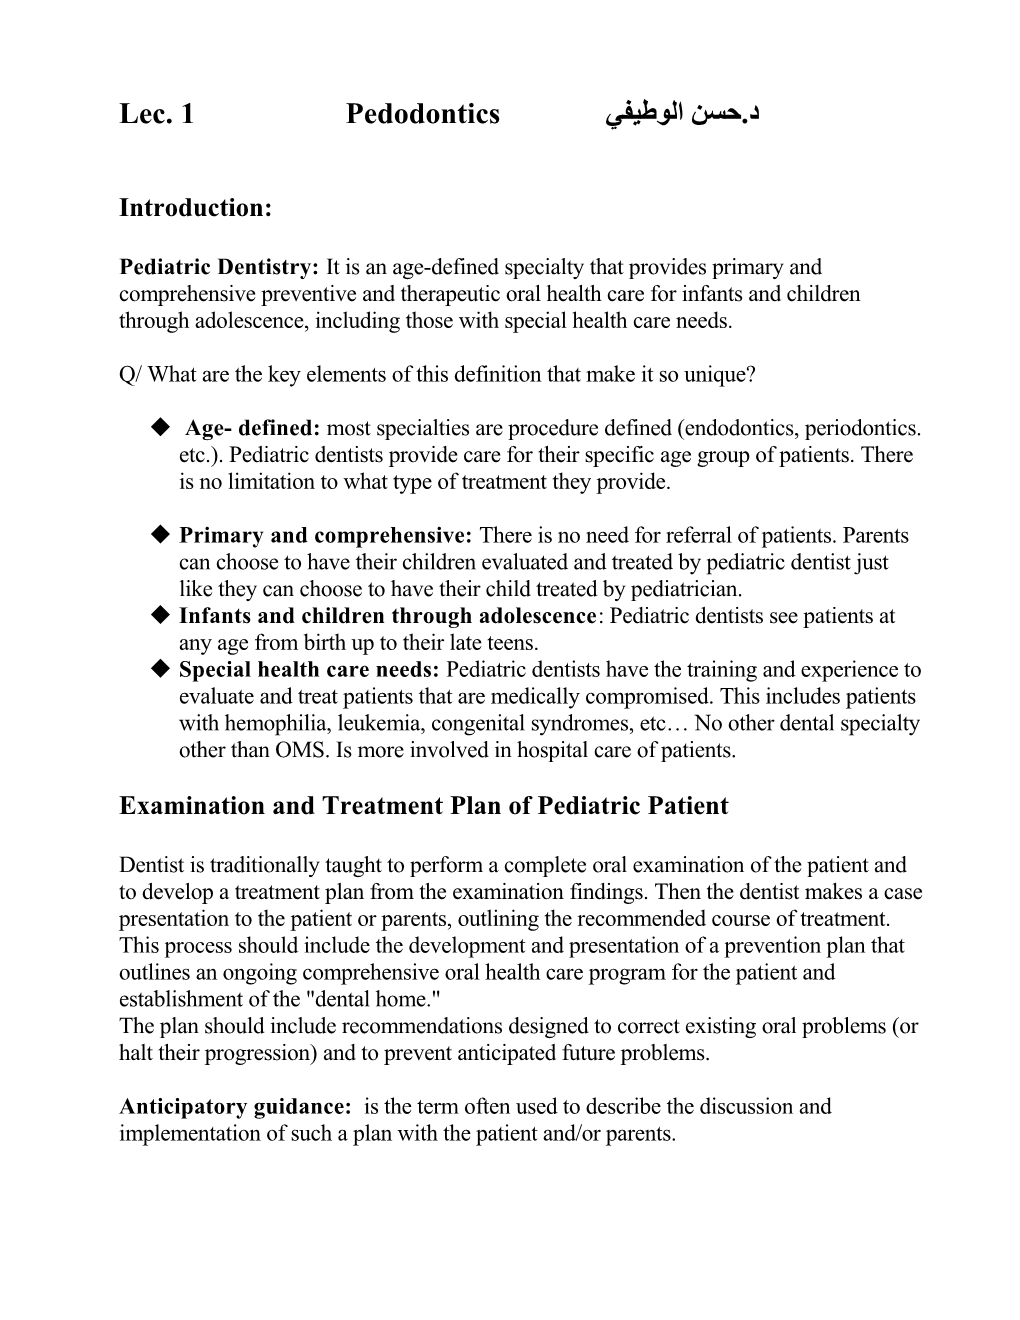 Examination and Treatment Plan of Pediatric Patient